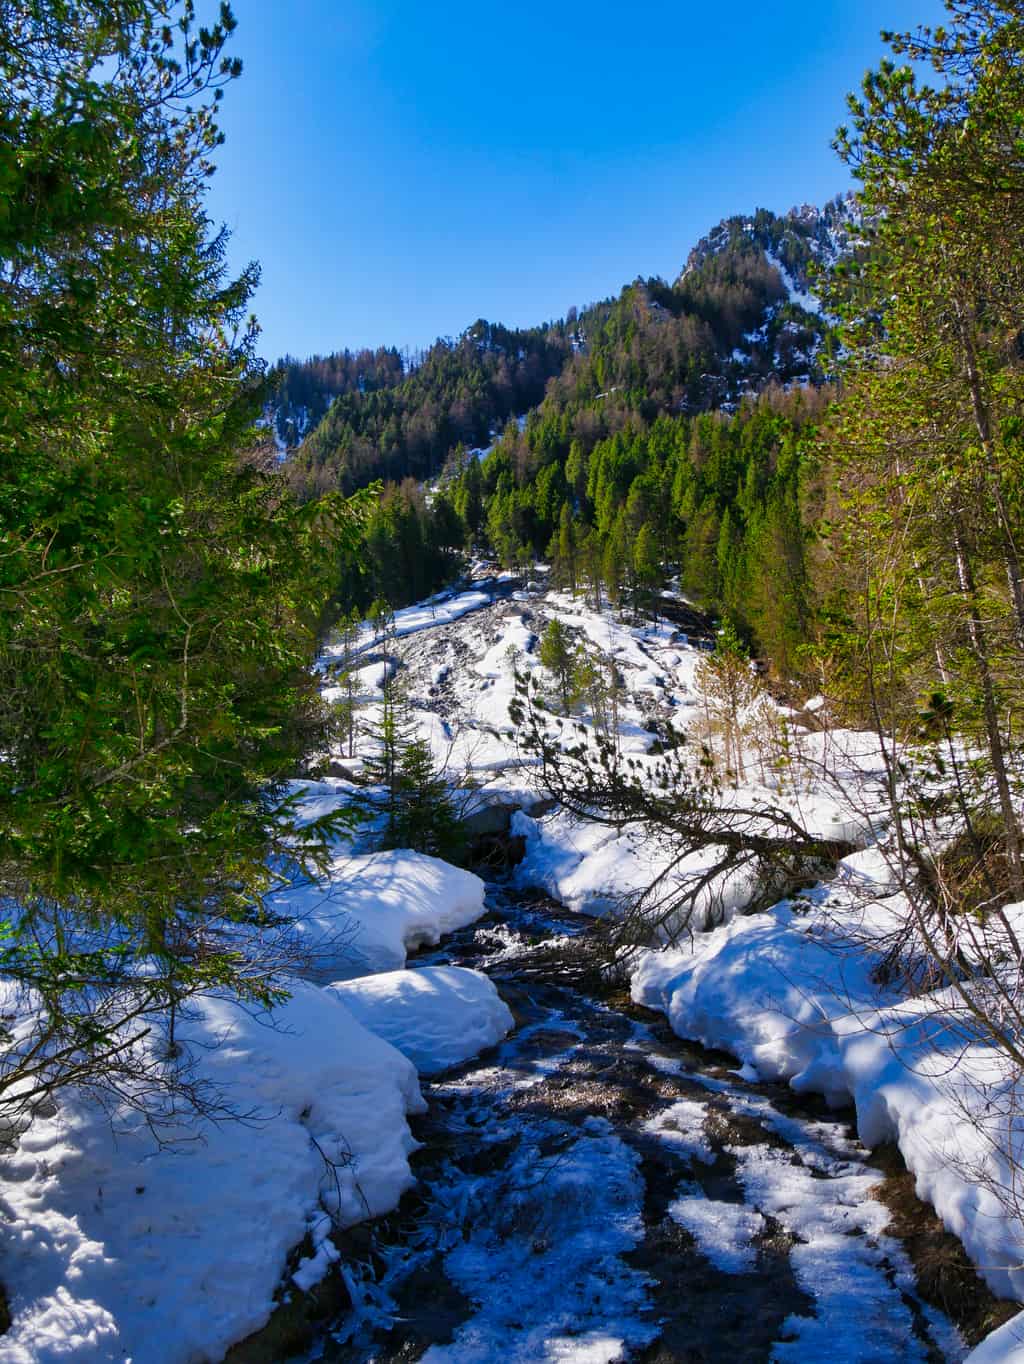 Snowy stream surrounded by green trees and deep blue sky